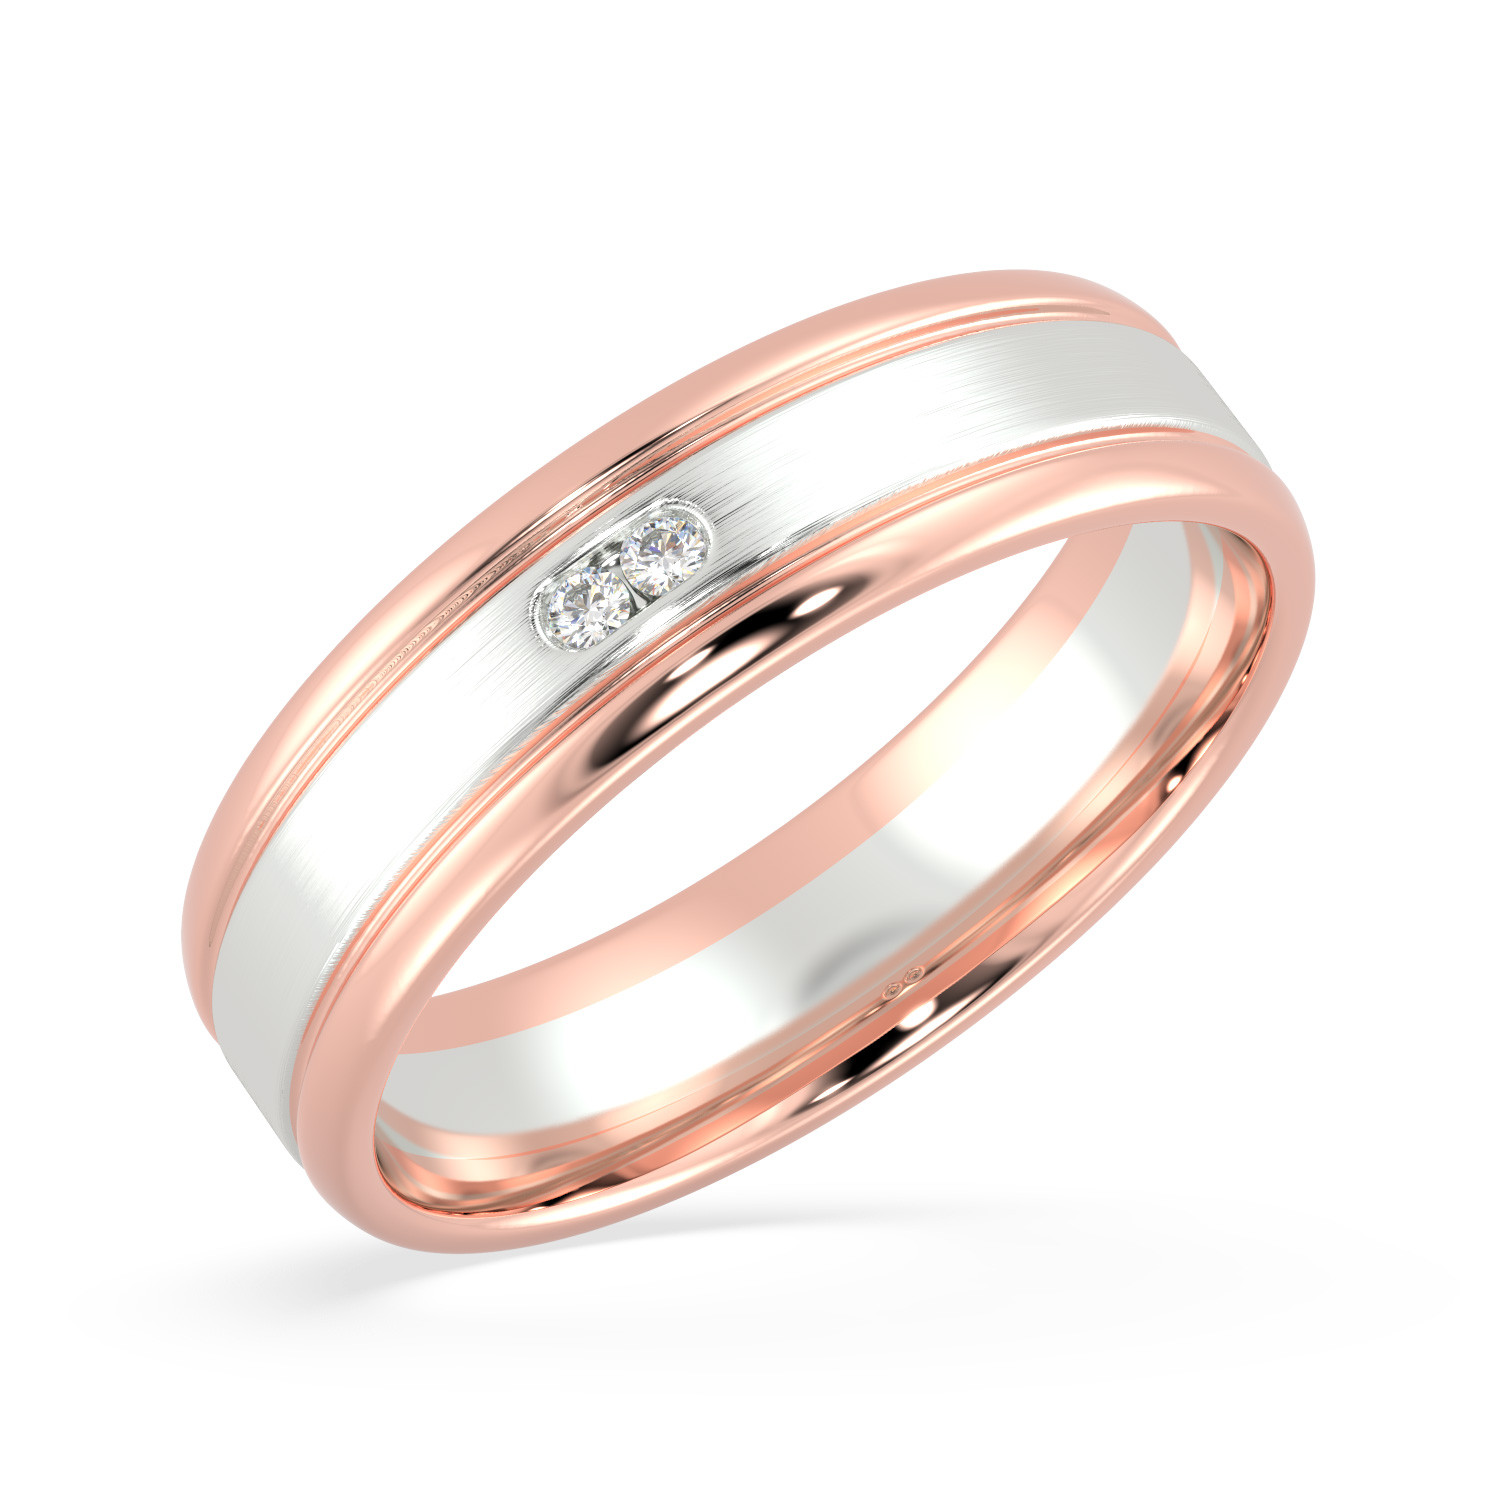 White Gold vs Platinum For Wedding Rings - What's the Difference? - Calla Gold  Jewelry